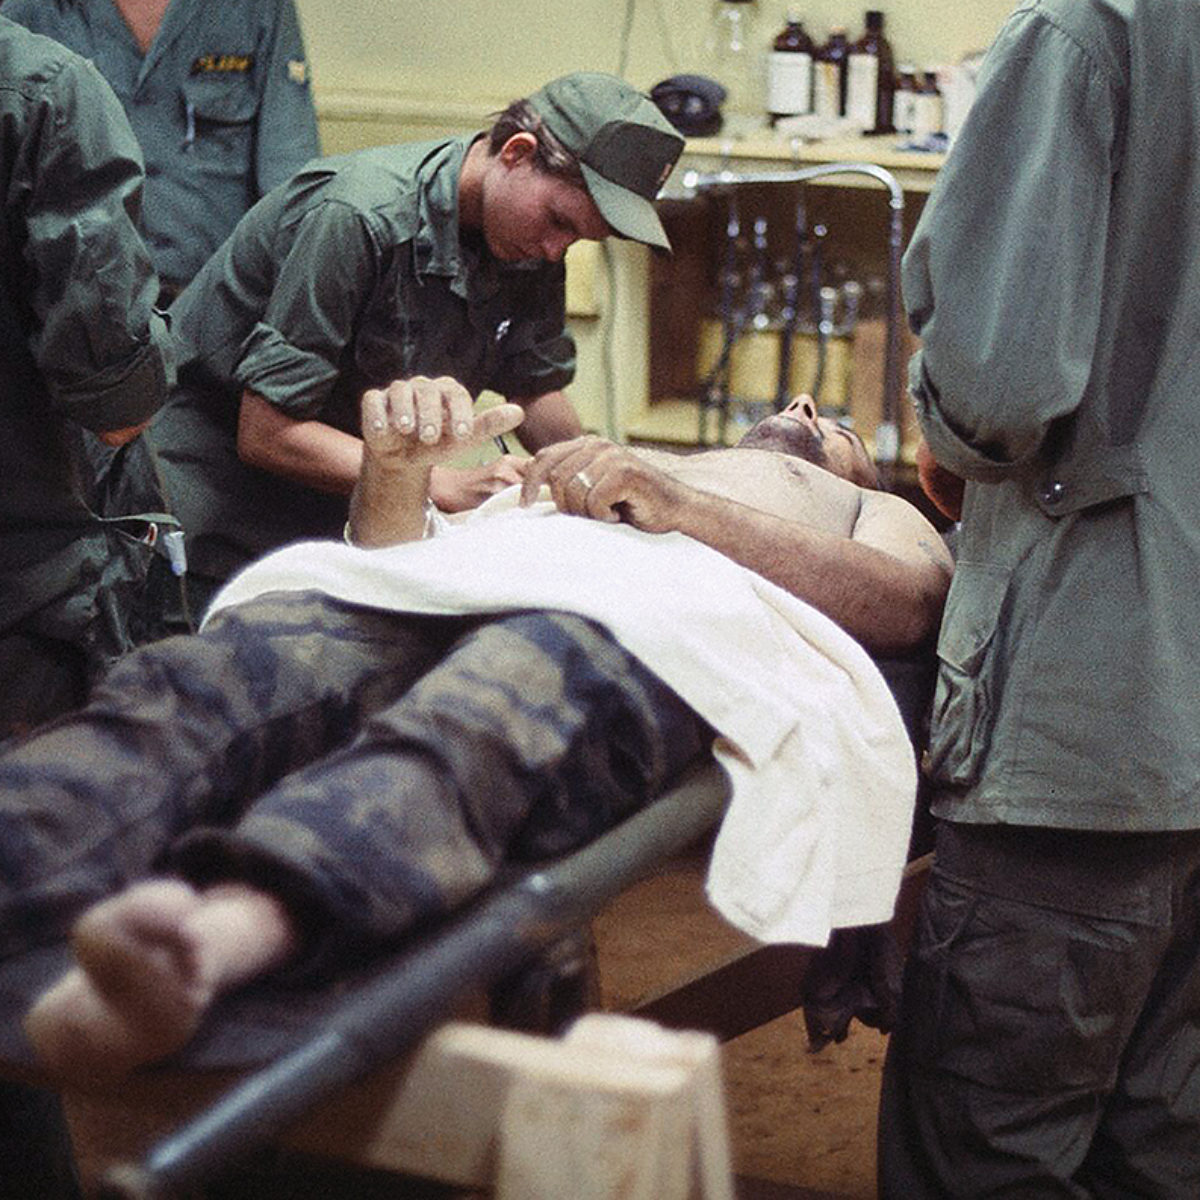 A nurse helps prepare a patient for an operation at the 7th Surgical Hospital, a mobile army surgical hospital (MASH), at Blackhorse base camp near Saigon in 1968. Nurses were among the earliest U.S. service members to arrive in Vietnam.